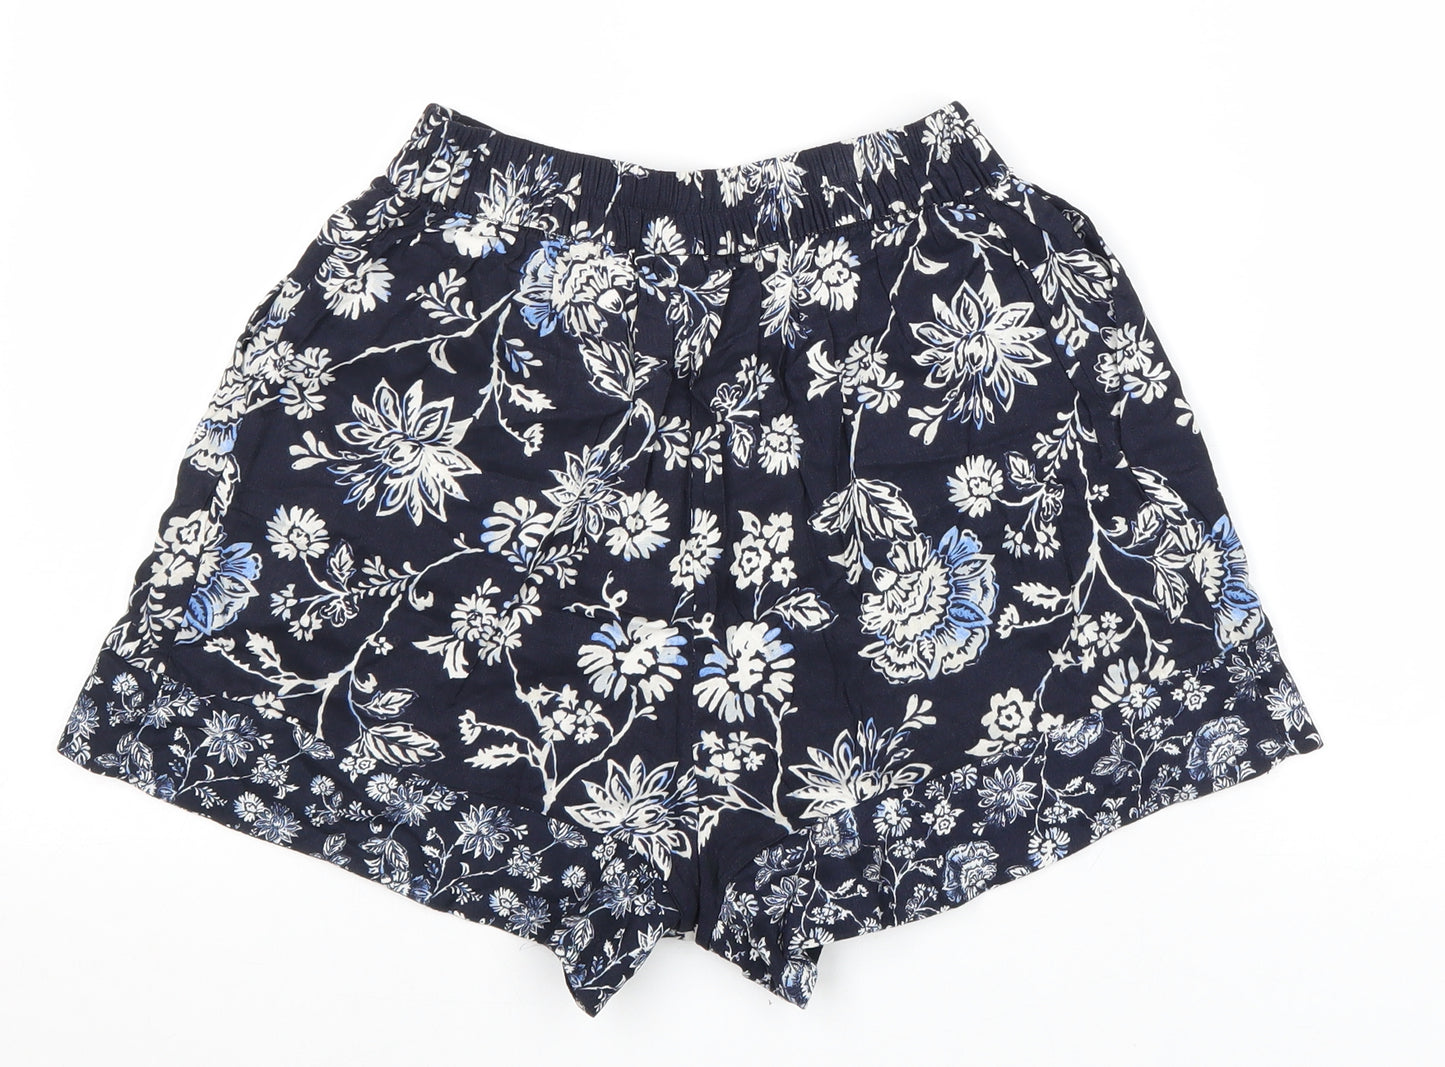 H&M Womens Blue Floral Viscose Bermuda Shorts Size 4 L15 in Regular Pull On